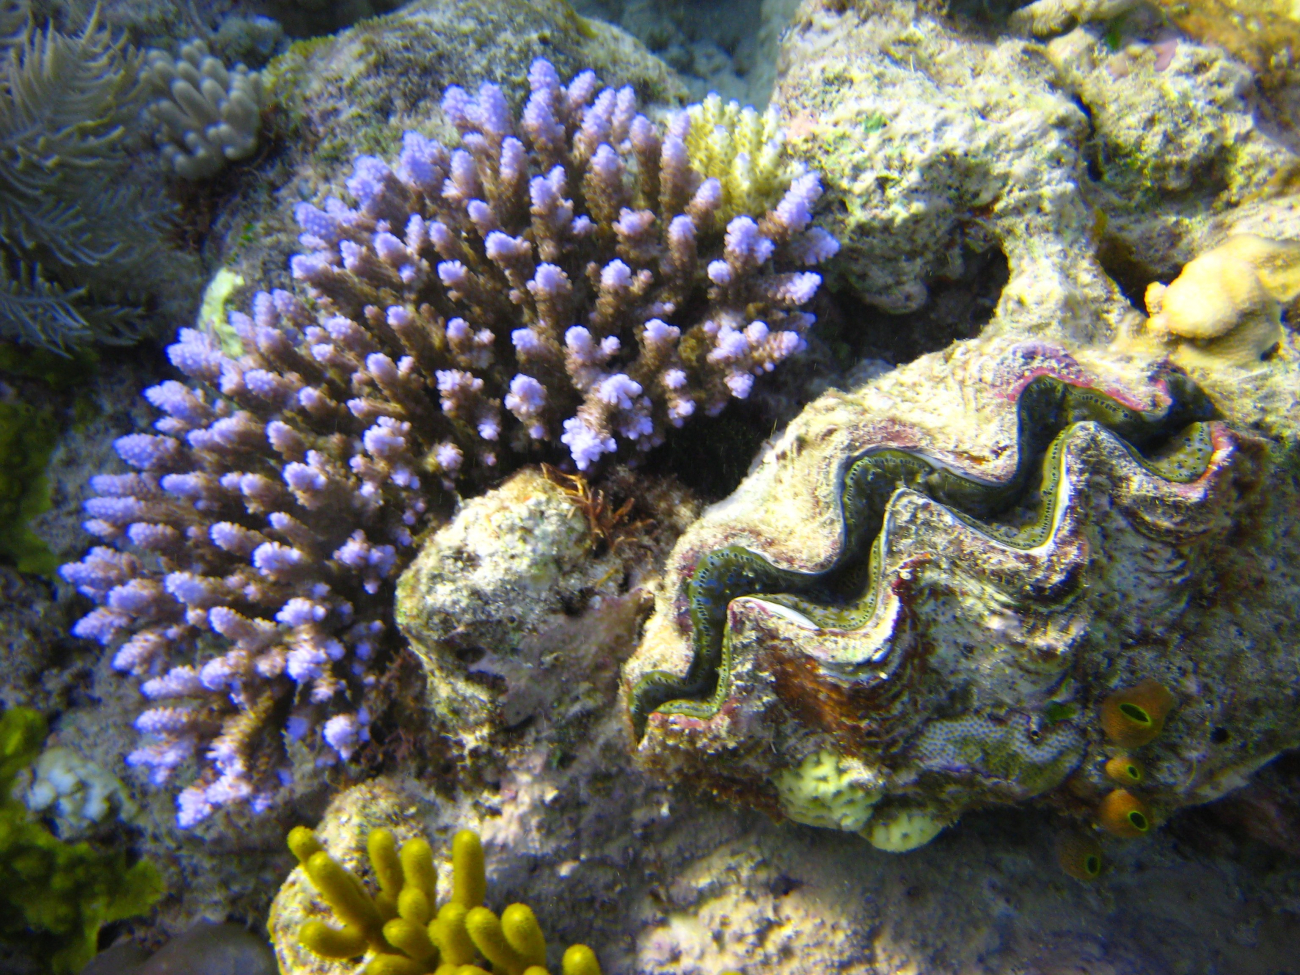 Reef scene with purple-tipped coral and giant clam shell